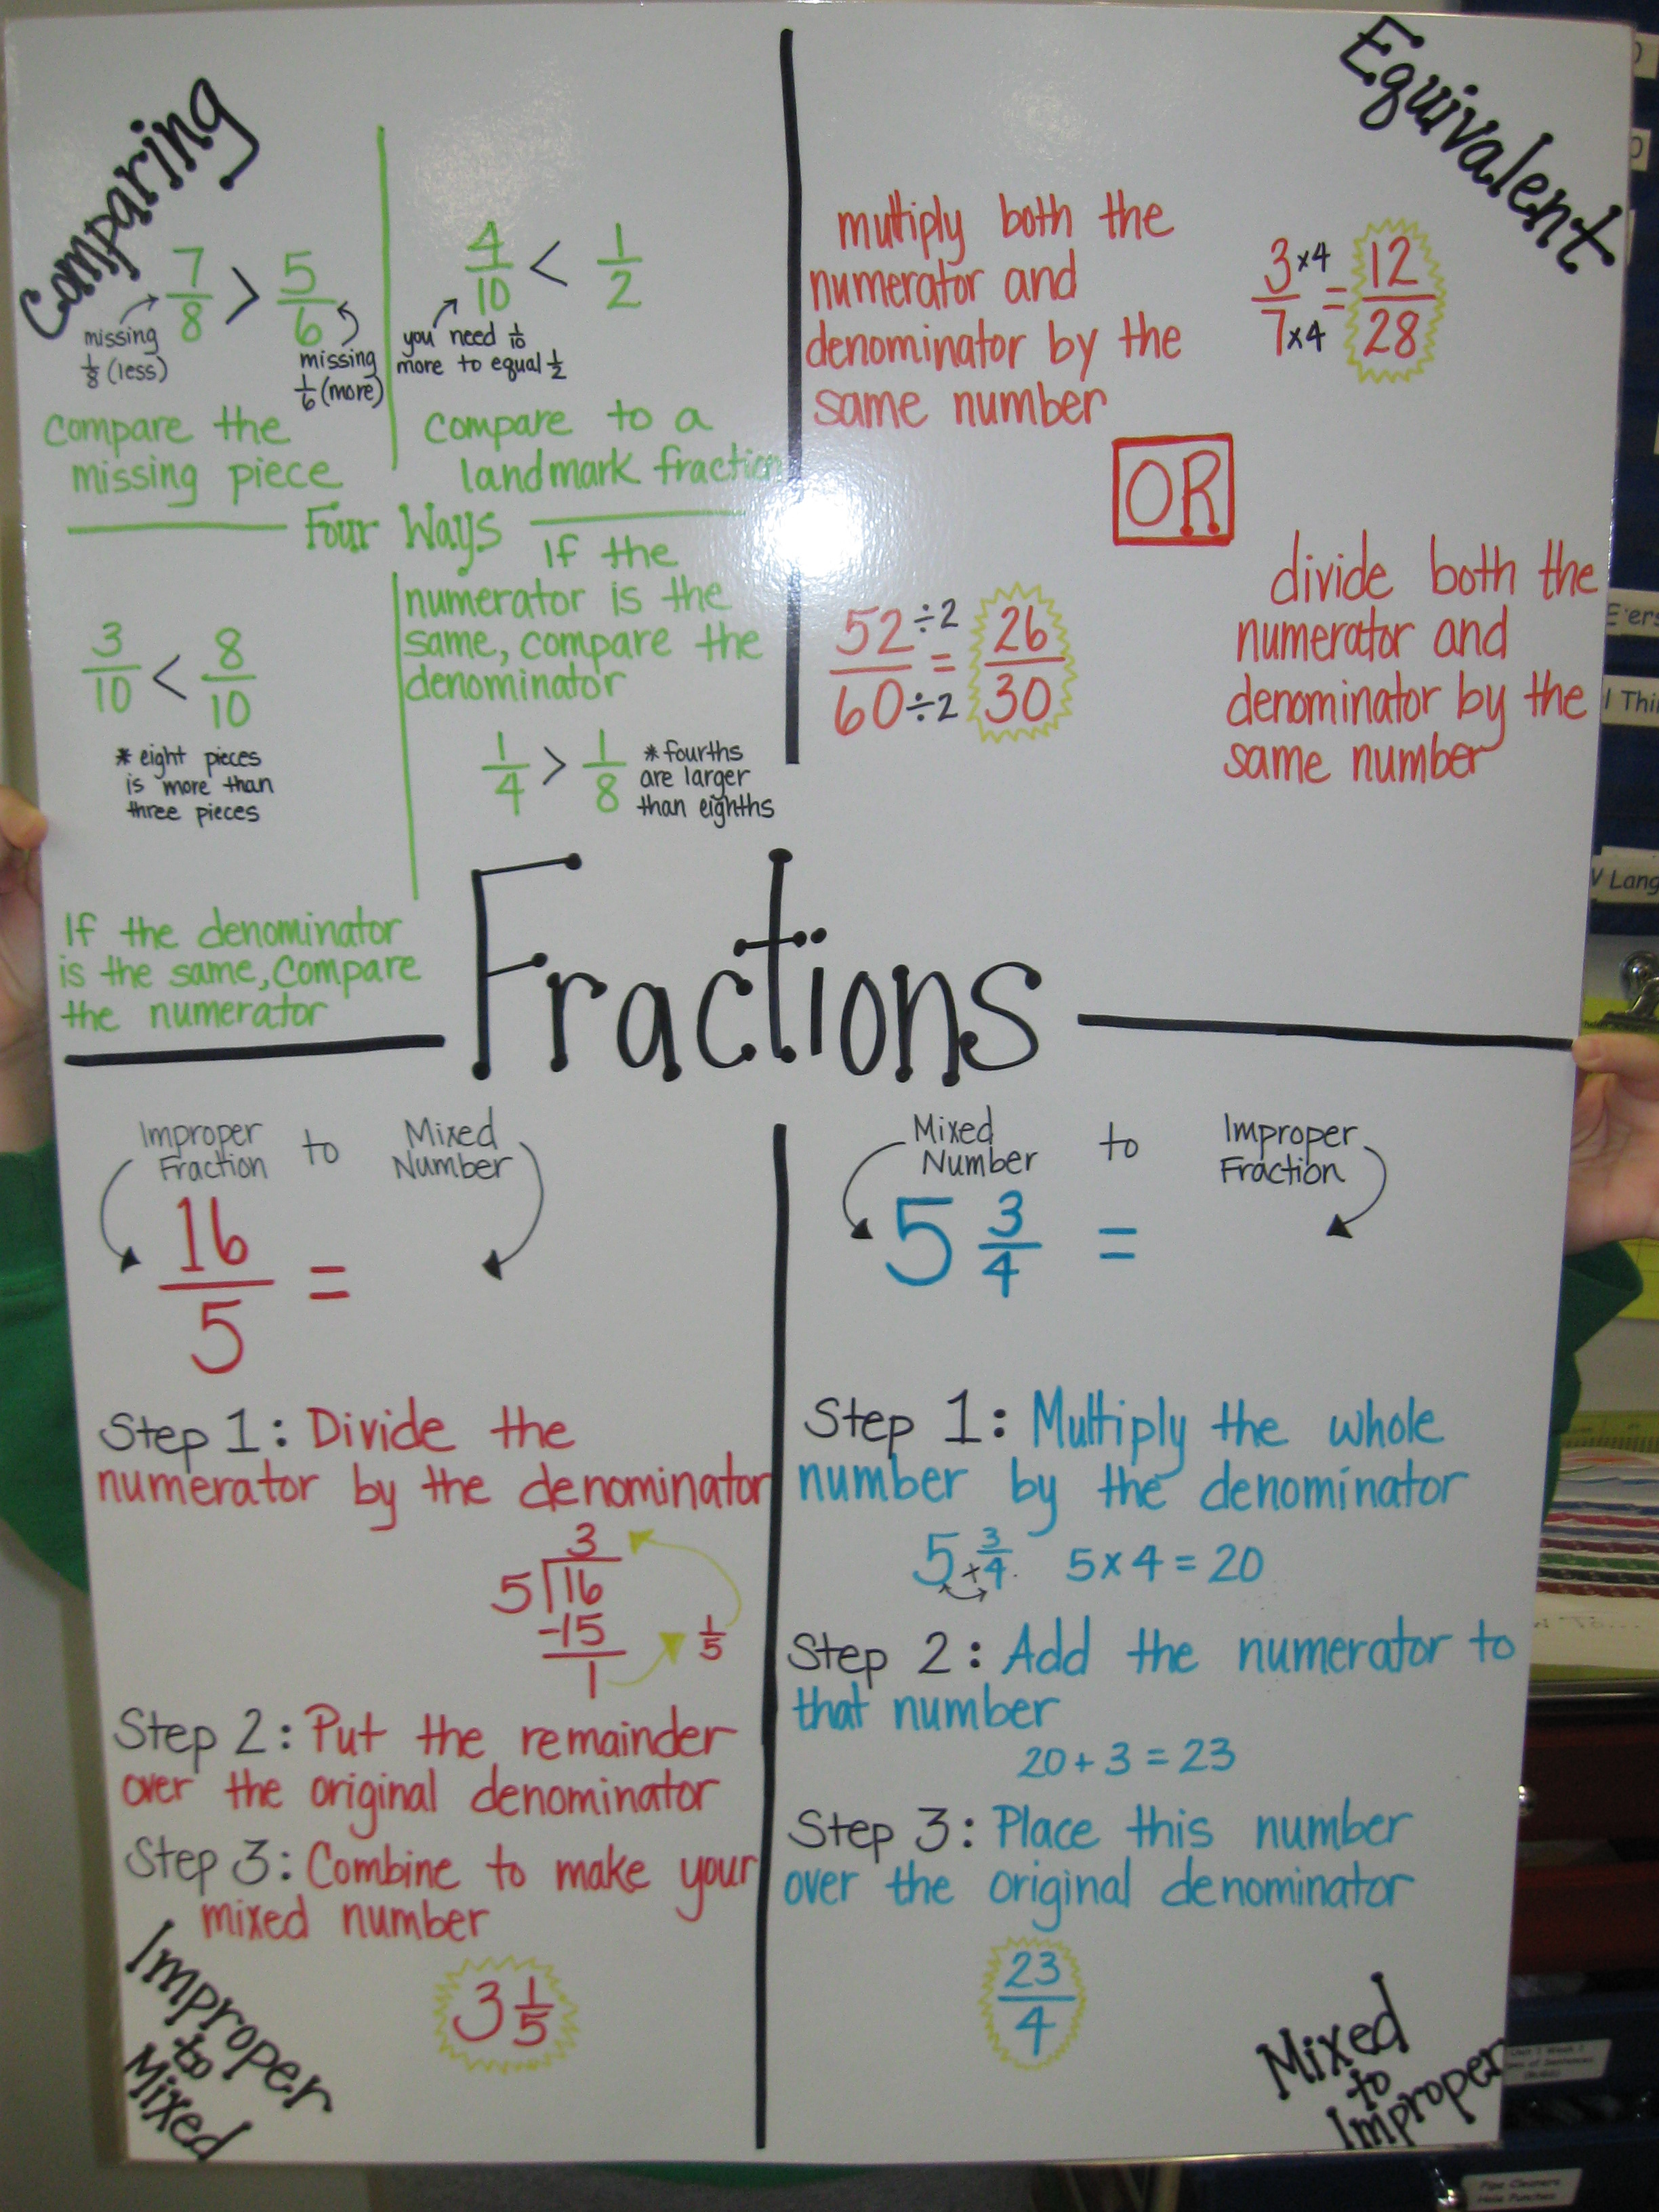 Equivalent Fractions Anchor Chart 4th Grade